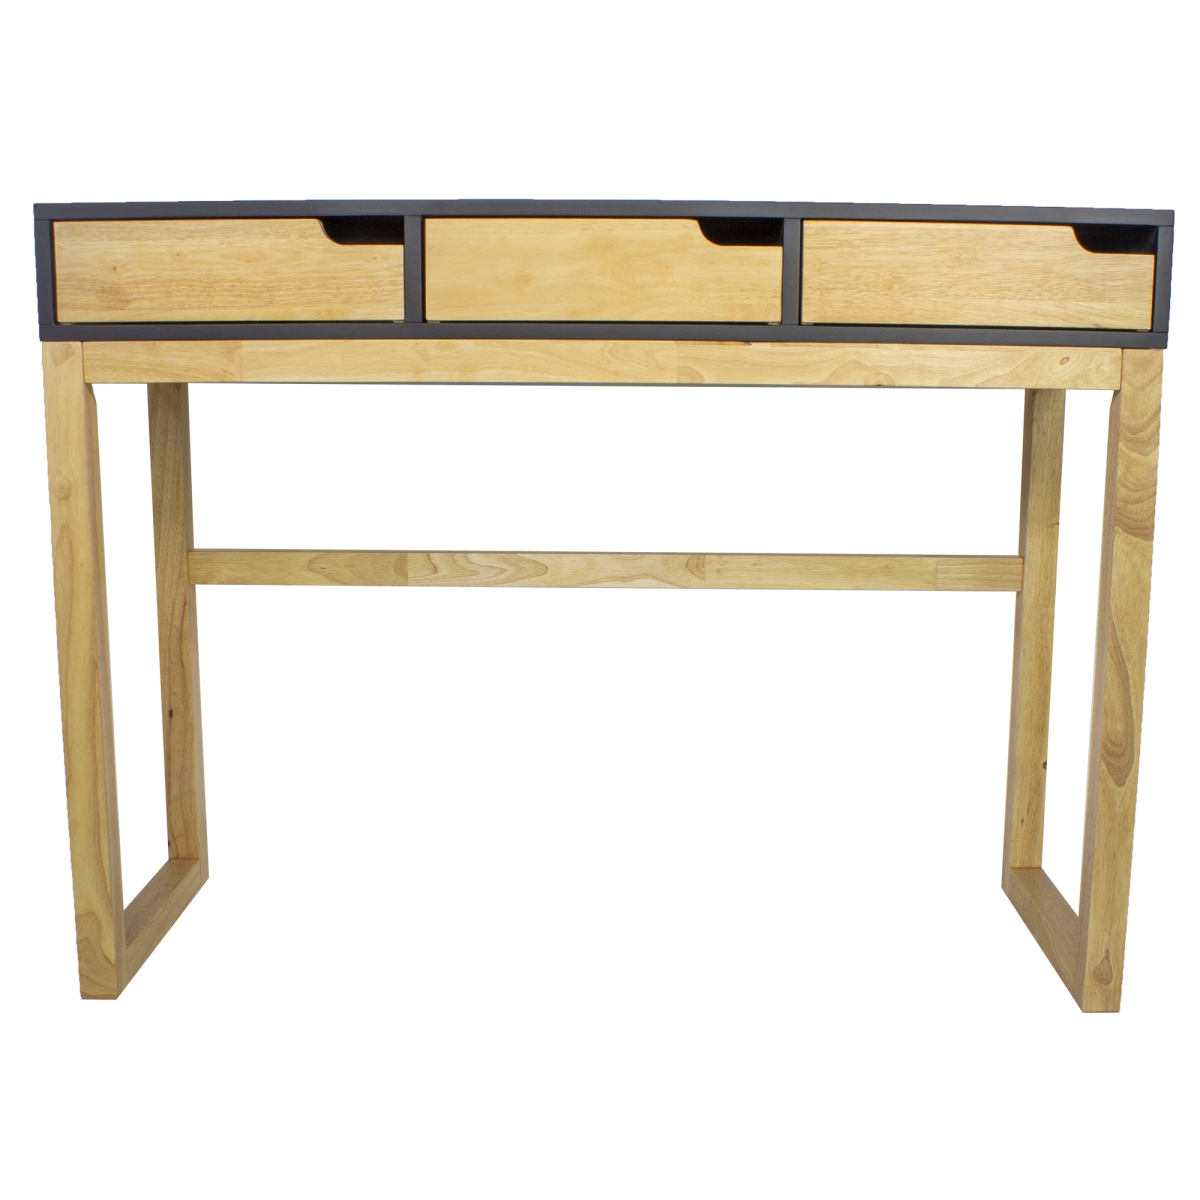 365083 Black & Natural Solid Wood Three Drawer Console Table, 43 X 16 X 32 In.